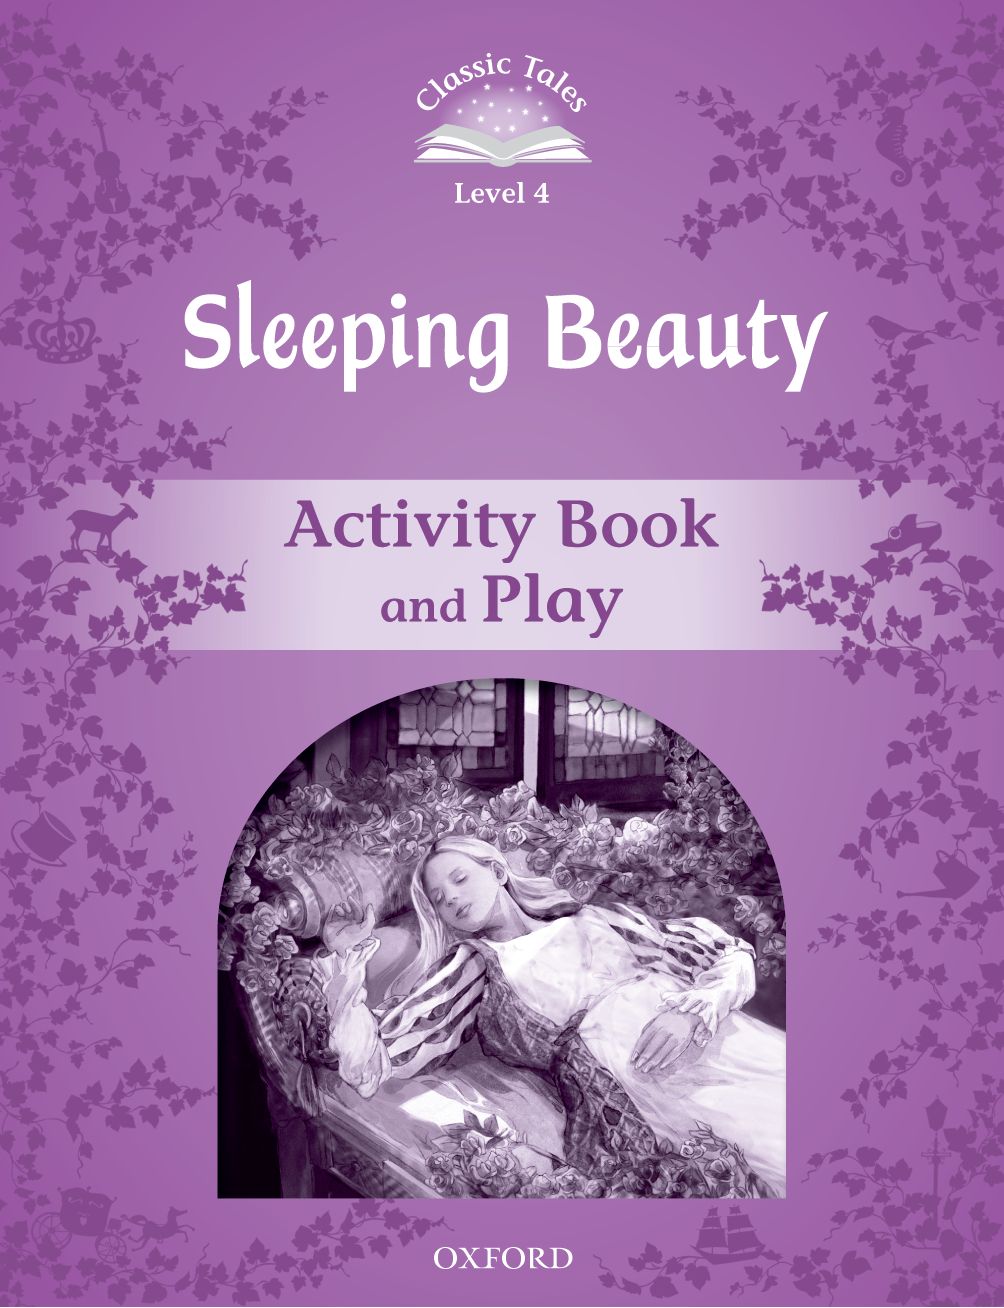 Oxford Classic Tales: Sleeping Beauty Activity Book and Play